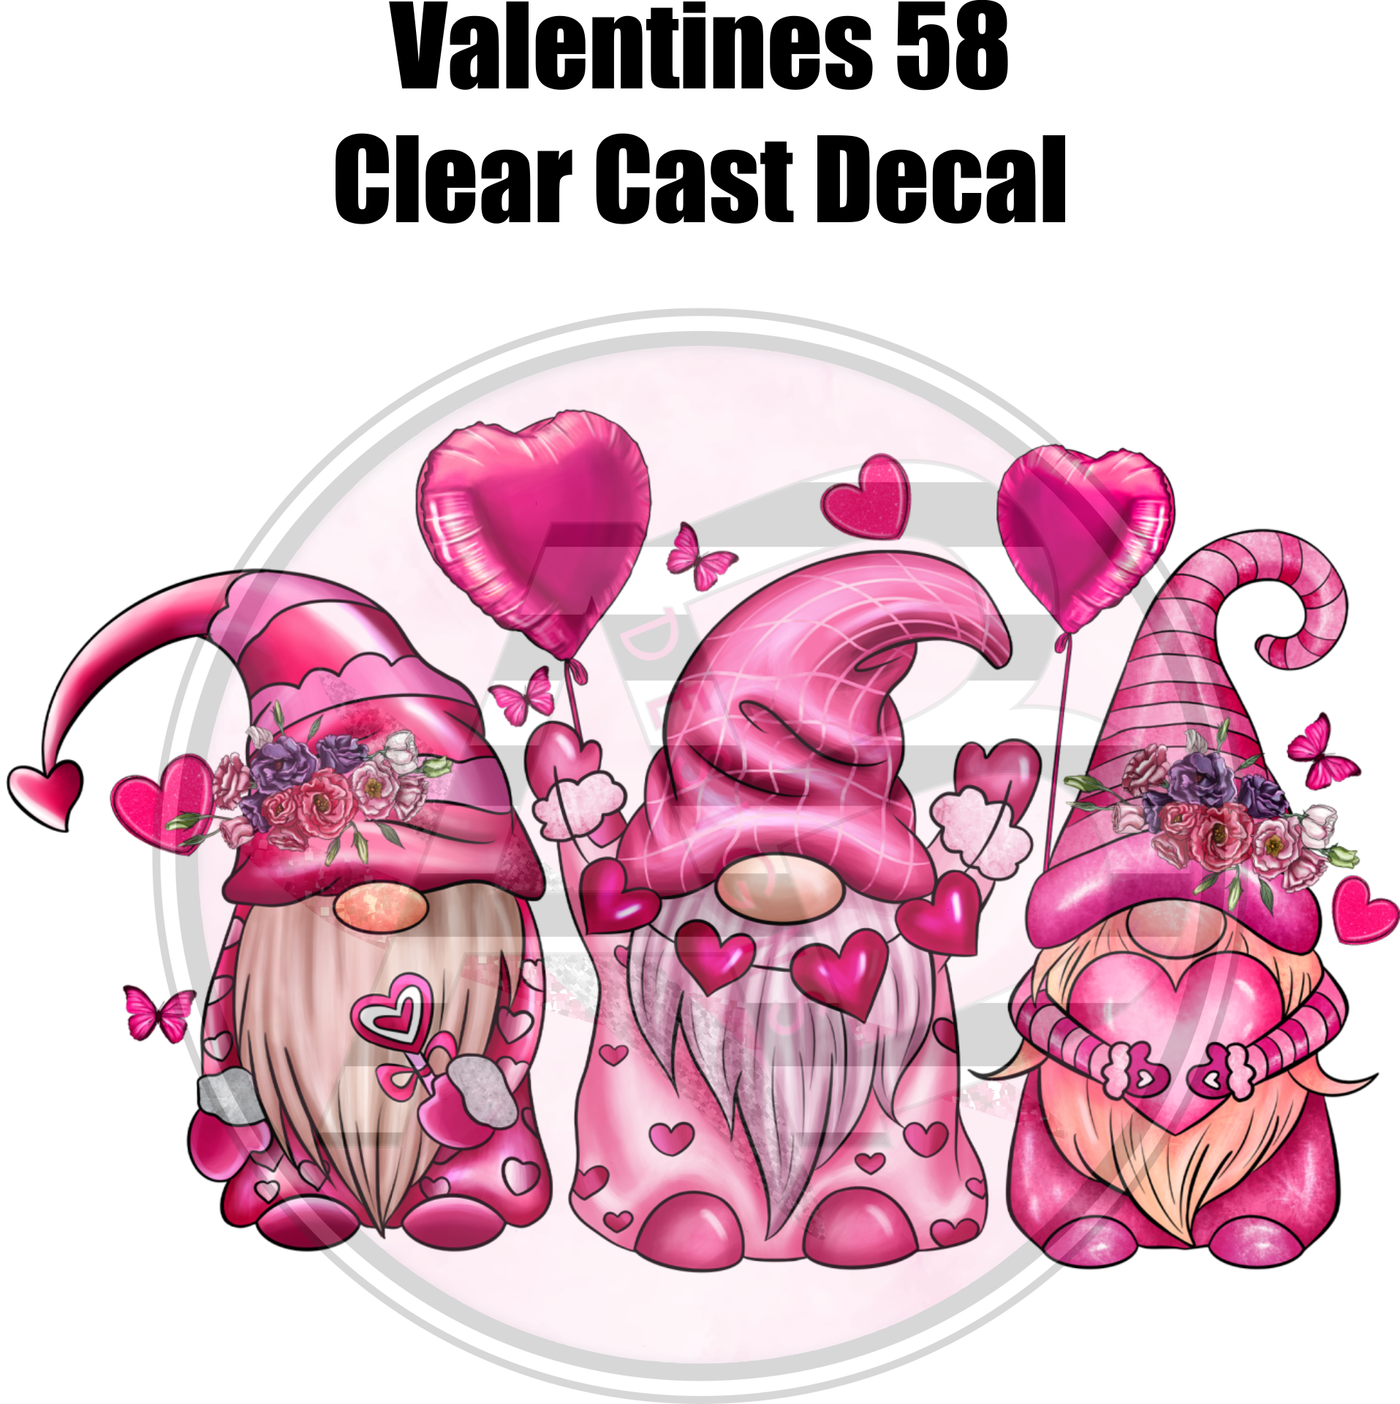 Valentines 58 - Clear Cast Decal